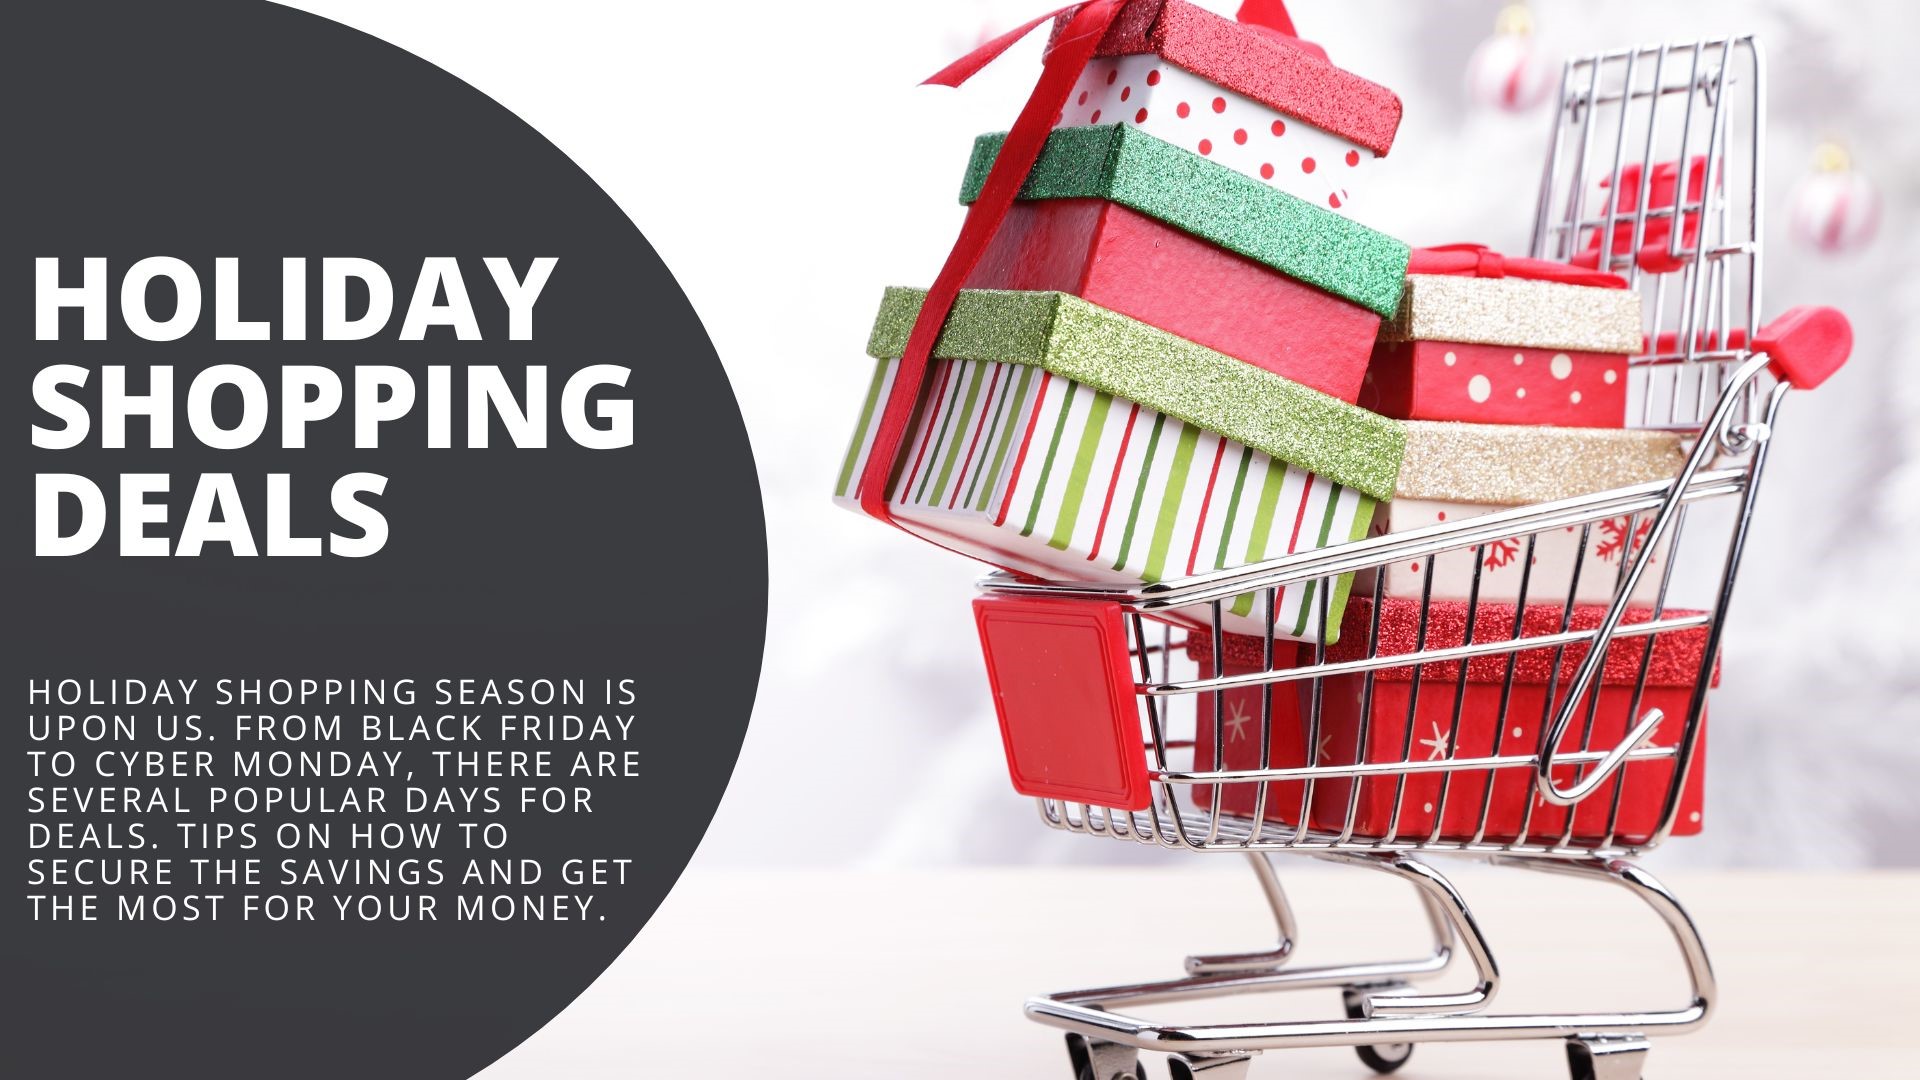 Holiday shopping season is here. It's not just Black Friday and Cyber Monday to get the deals anymore, as retailers roll out savings earlier. Tips to save and more.